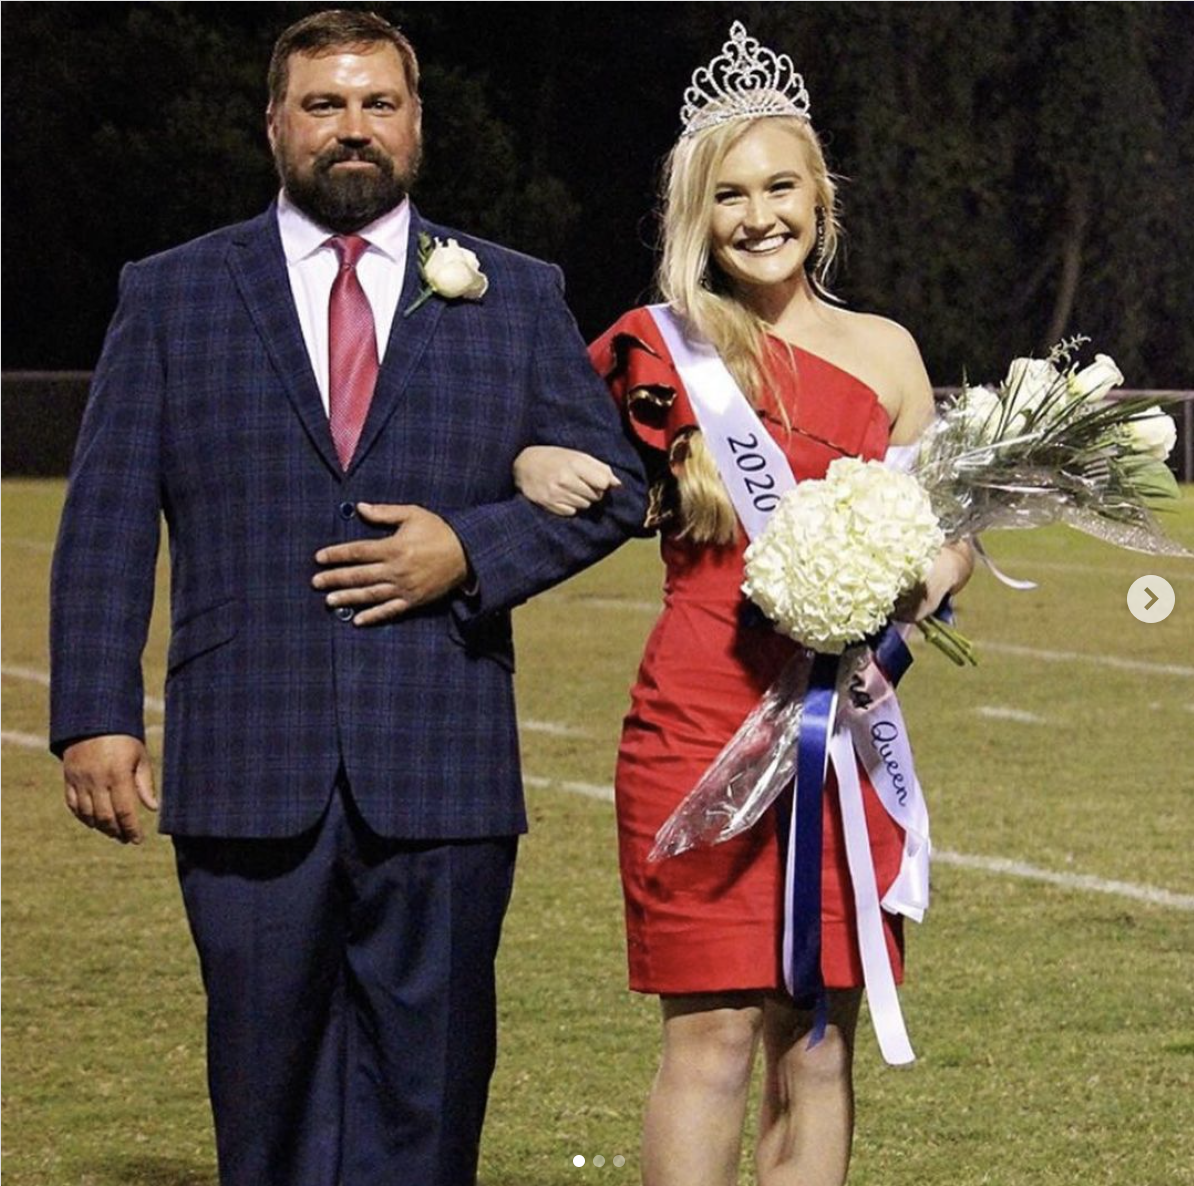 Charley, Homecoming Queen at Robert E. Lee Academy